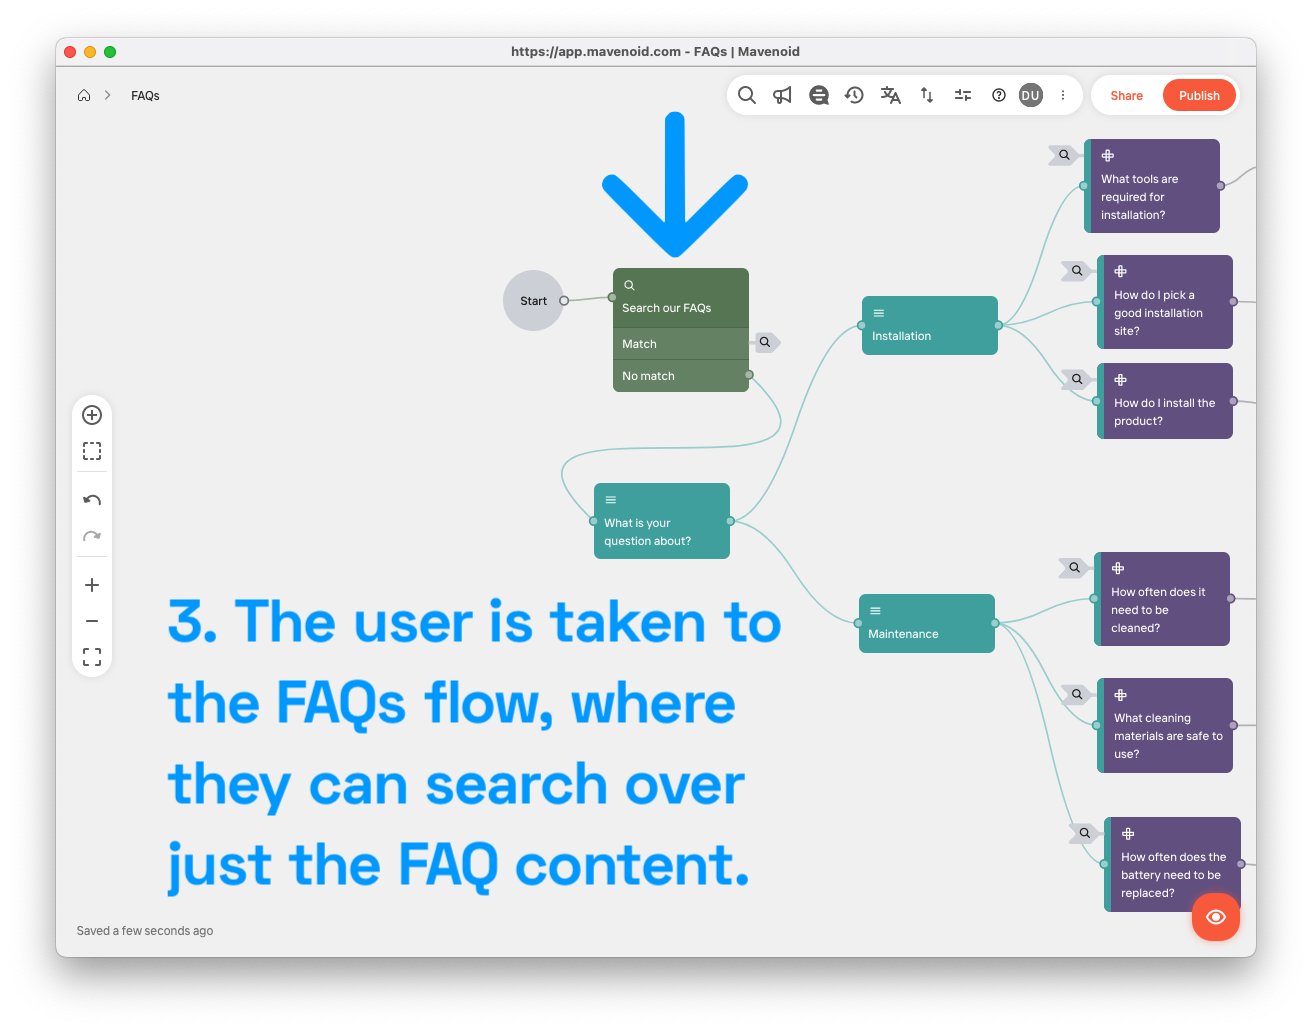 The user is taken to the FAQs flow, where they can search over just the FAQ content.